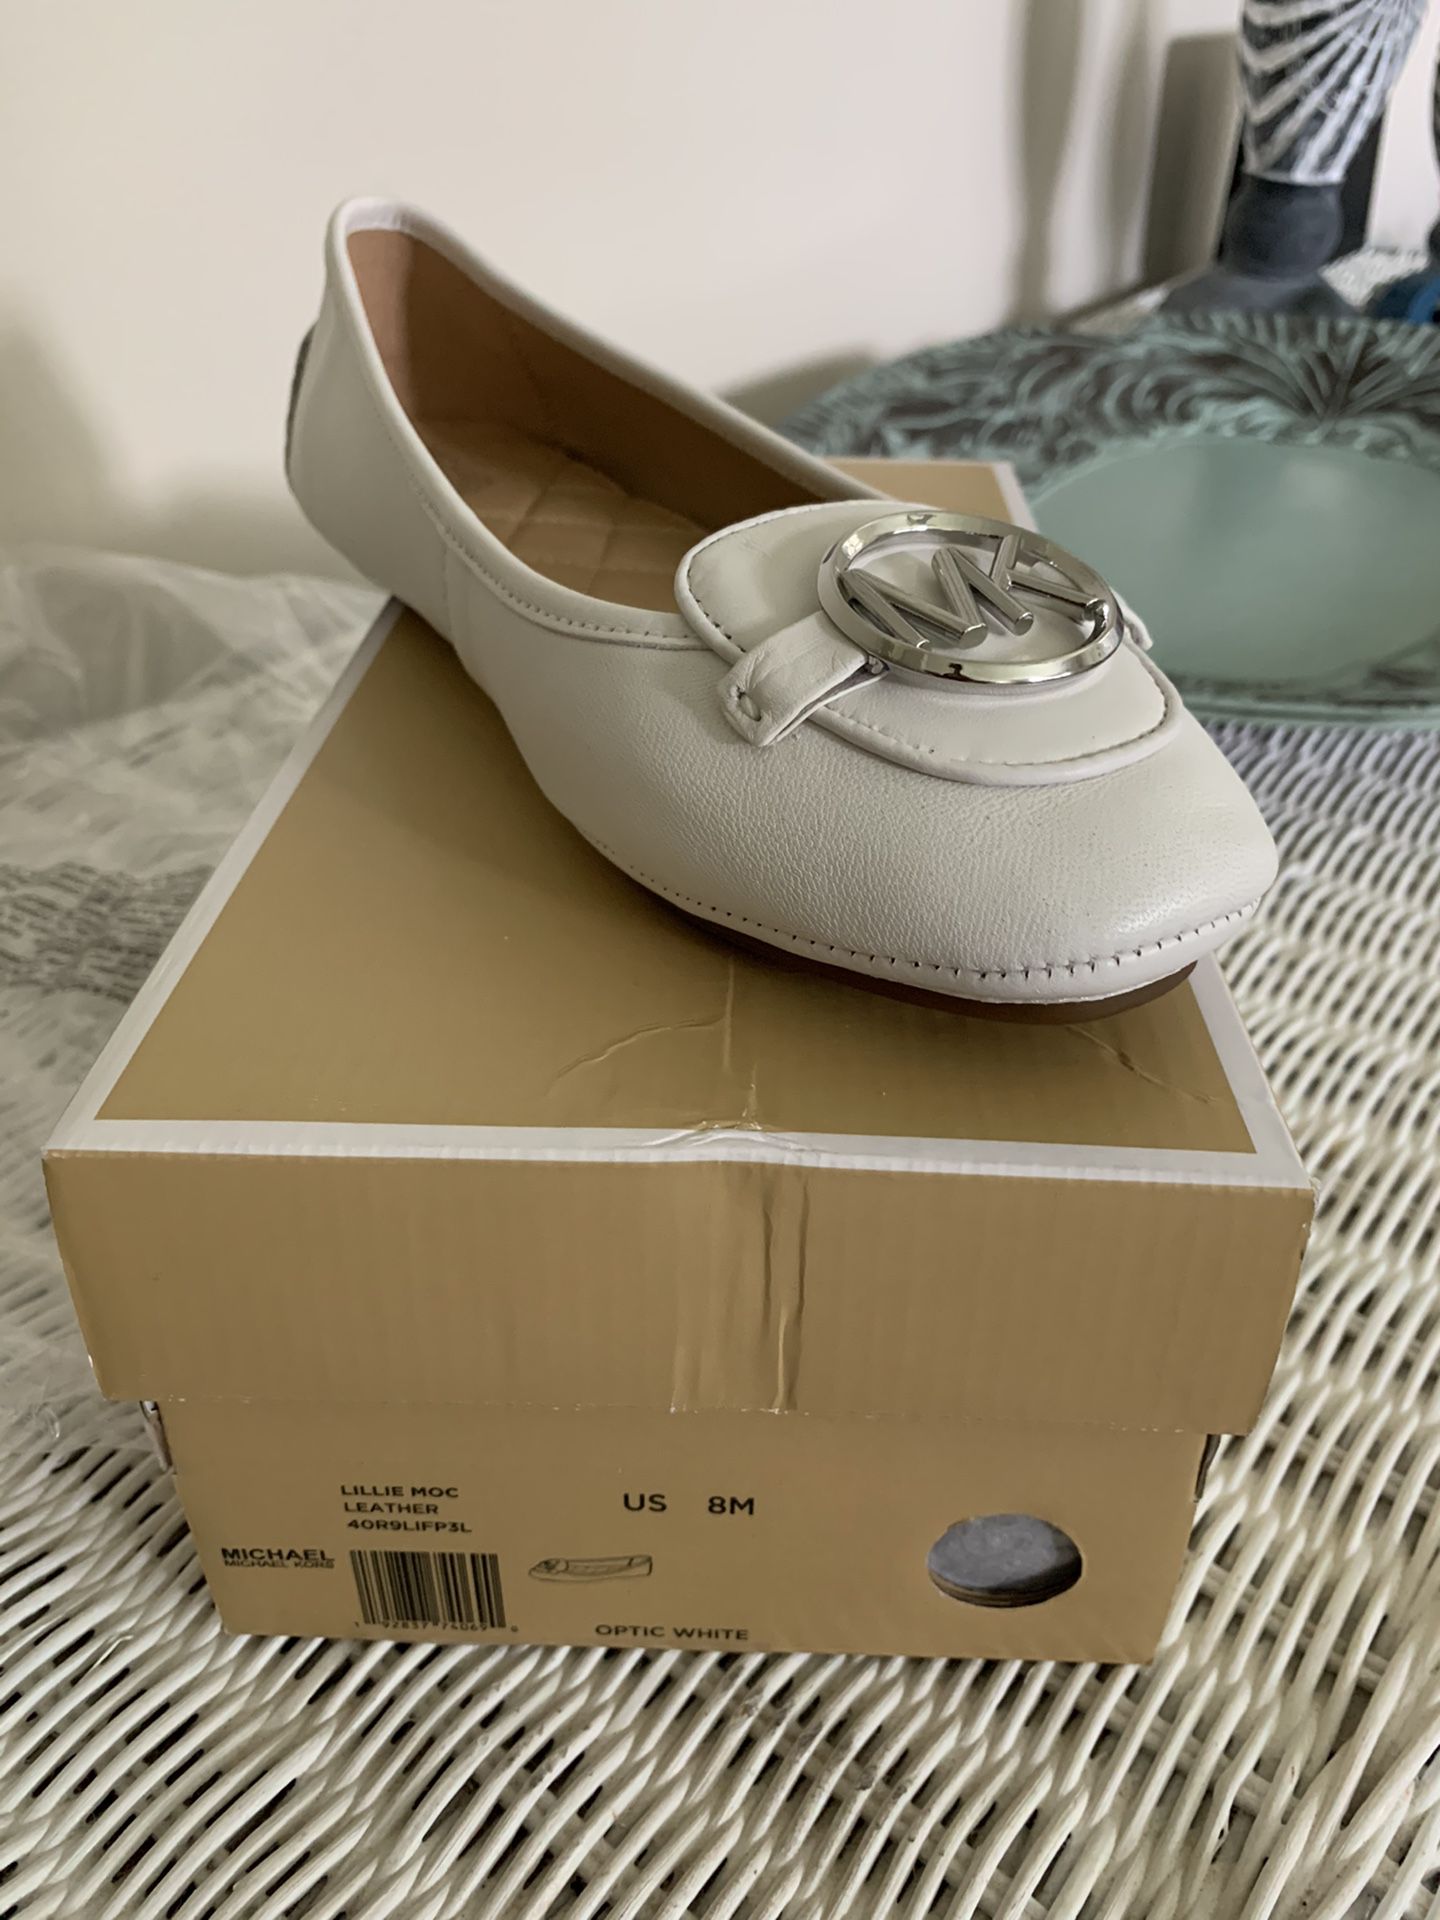 Michael Kors white leather shoes